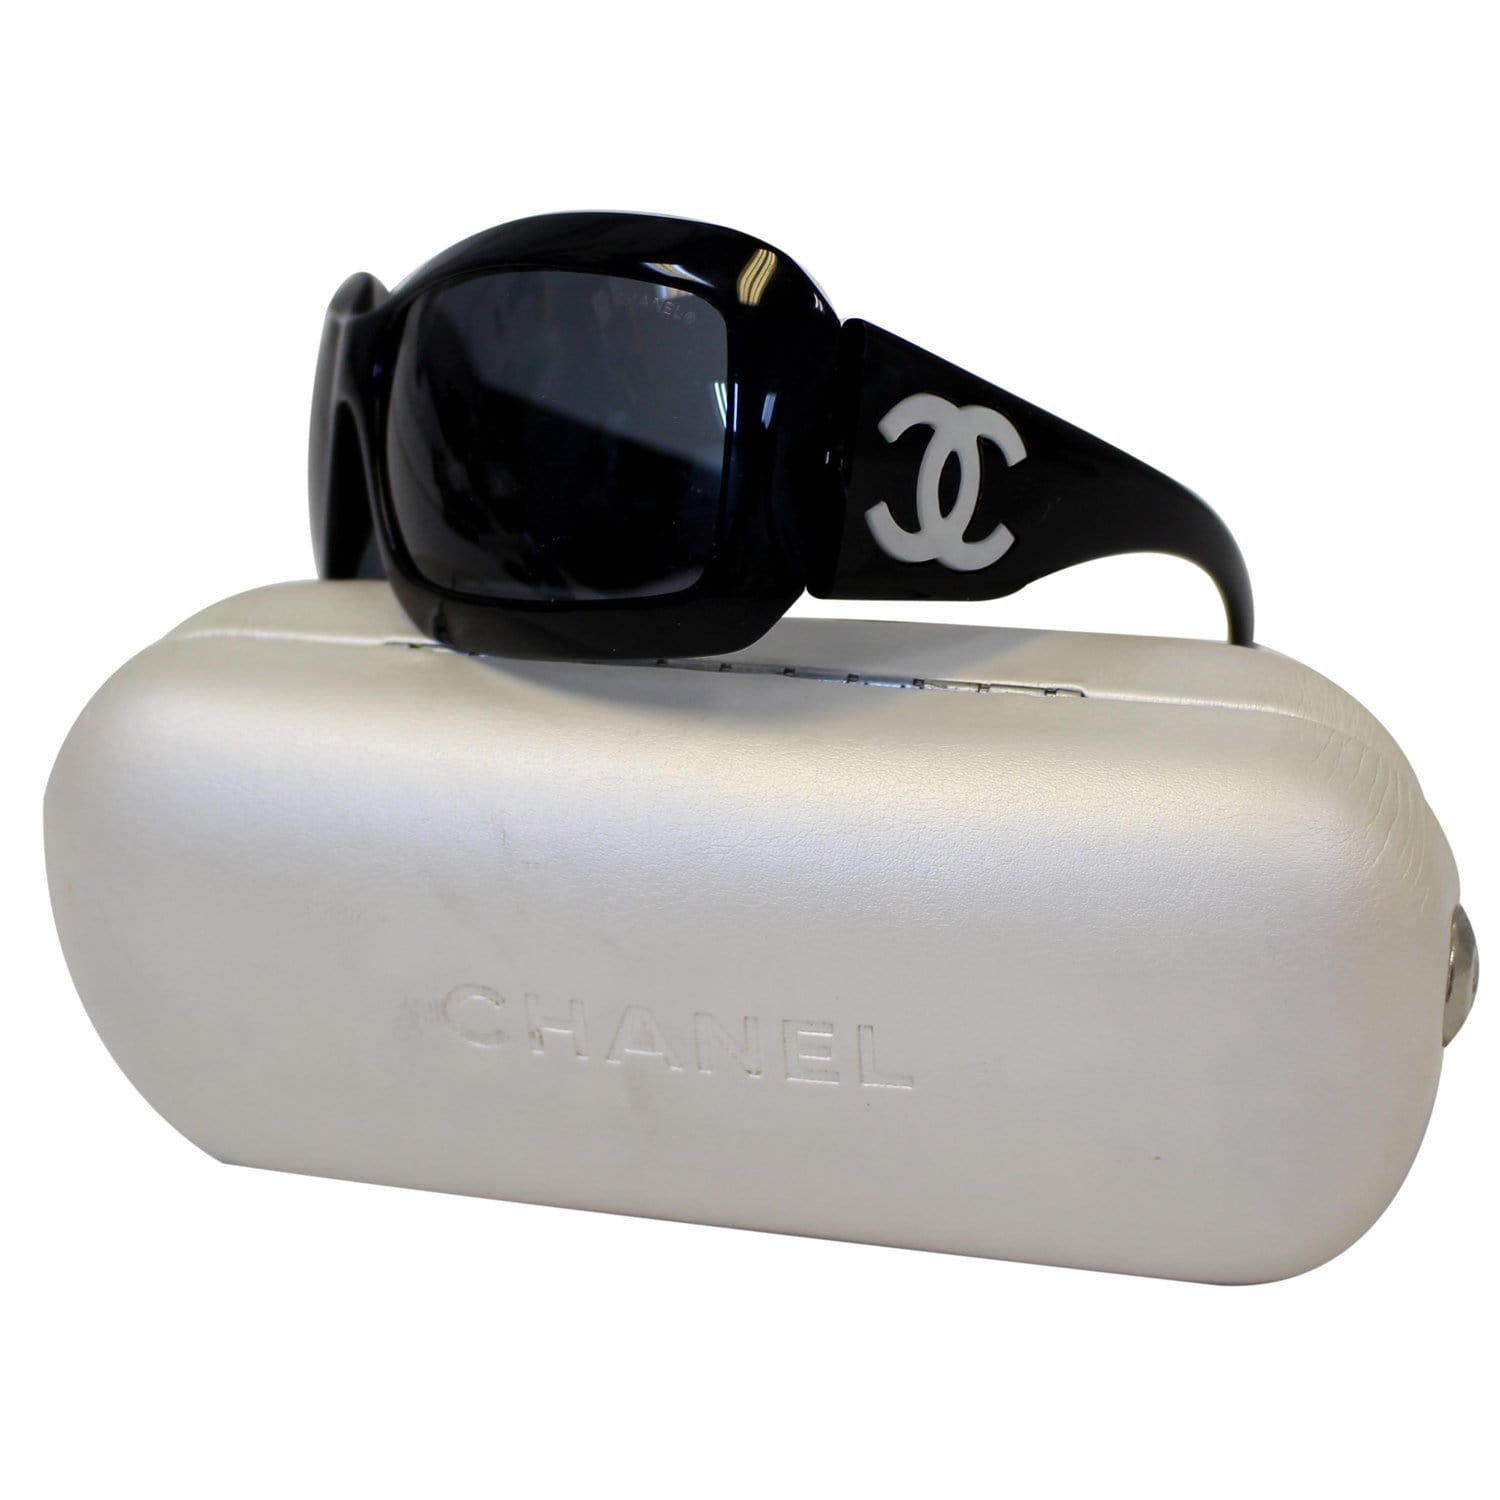 CHANEL Mother of Pearl CC Sunglasses 5076 Black 48492